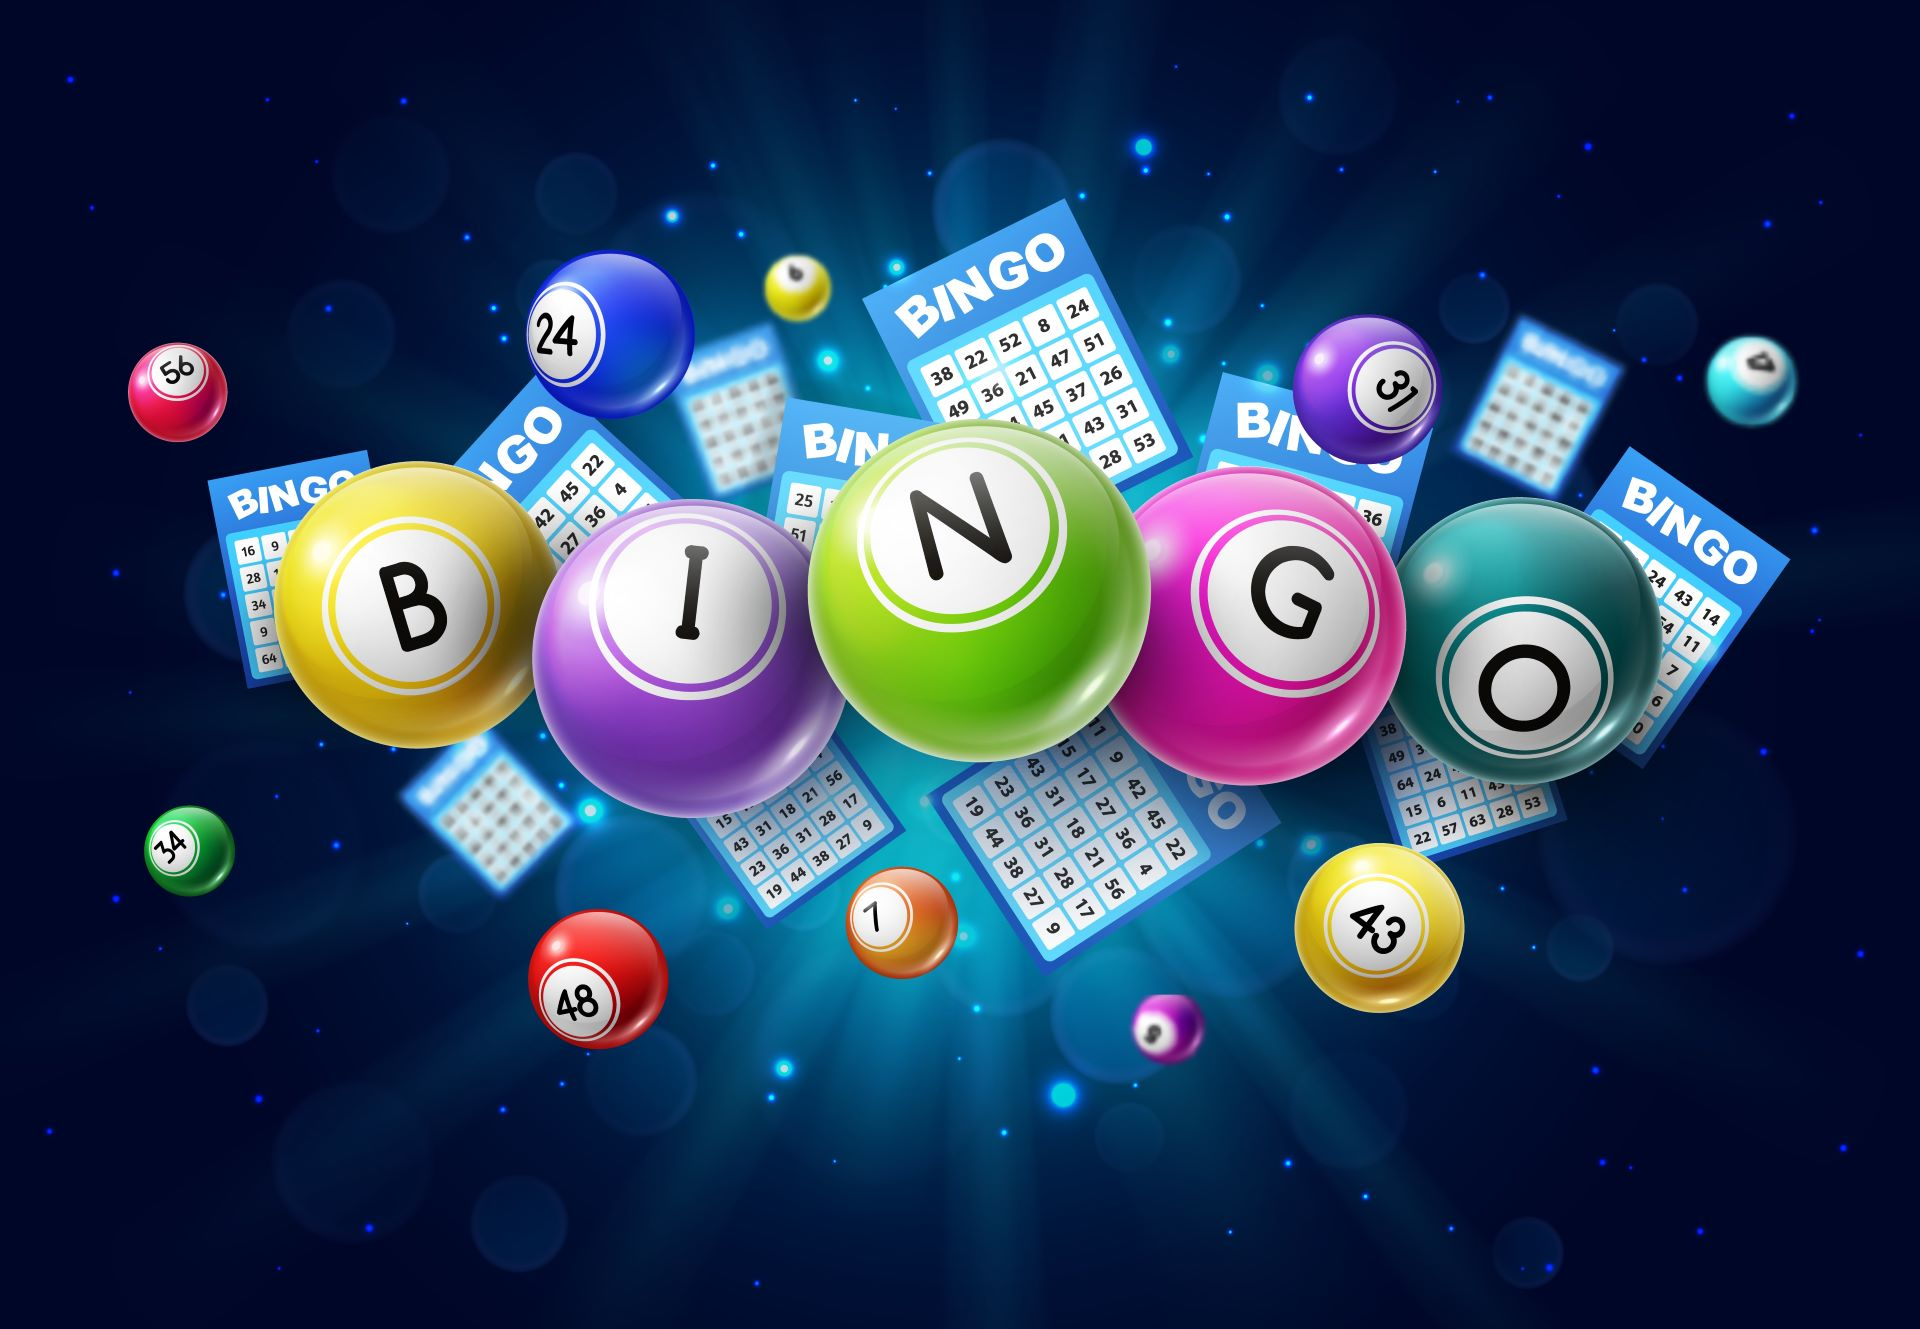 What Makes These New Bingo Sites So Popular?